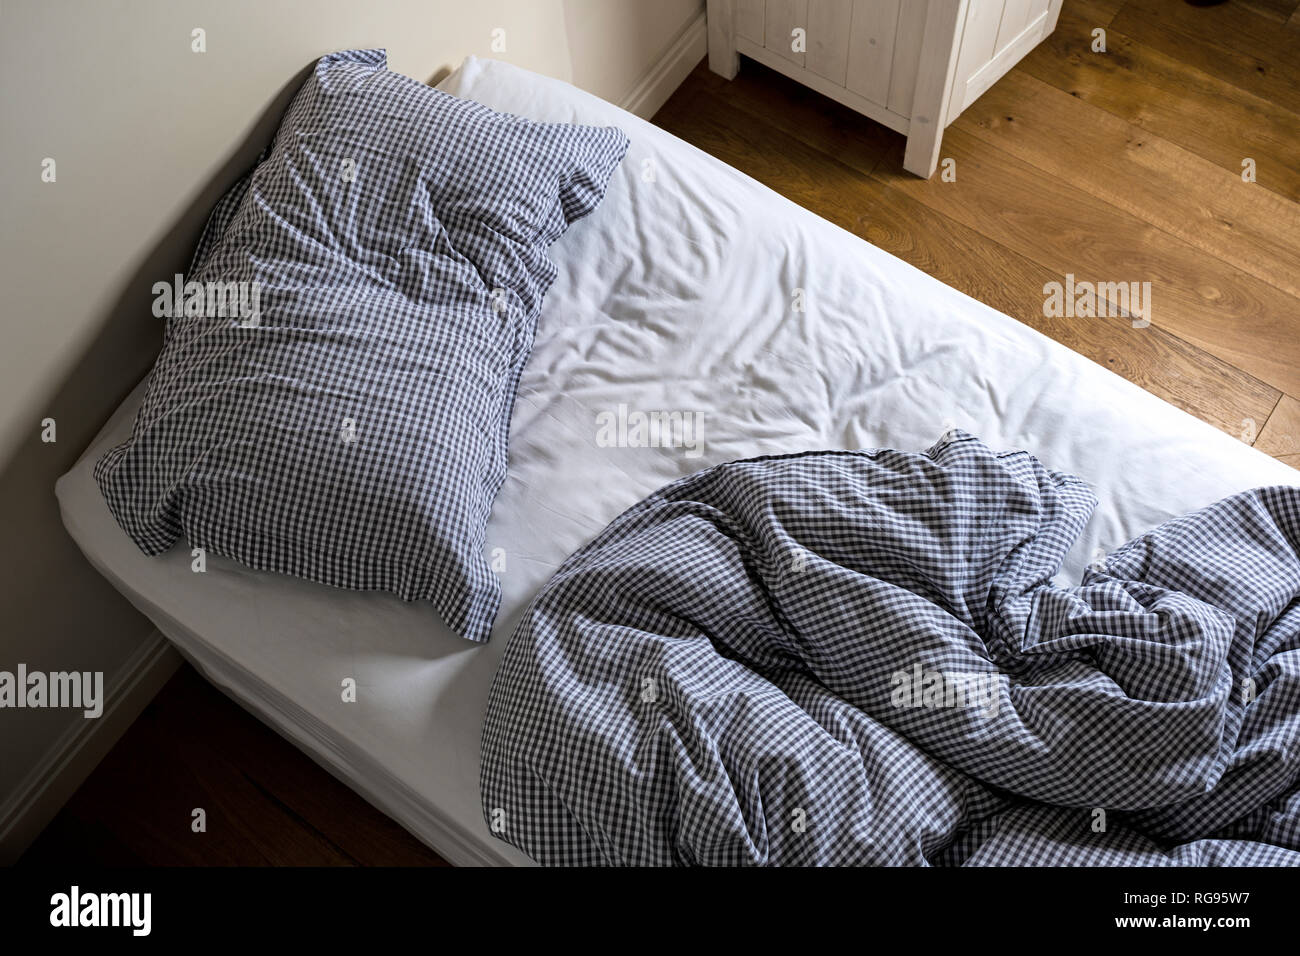 An unmade single bed. Stock Photo